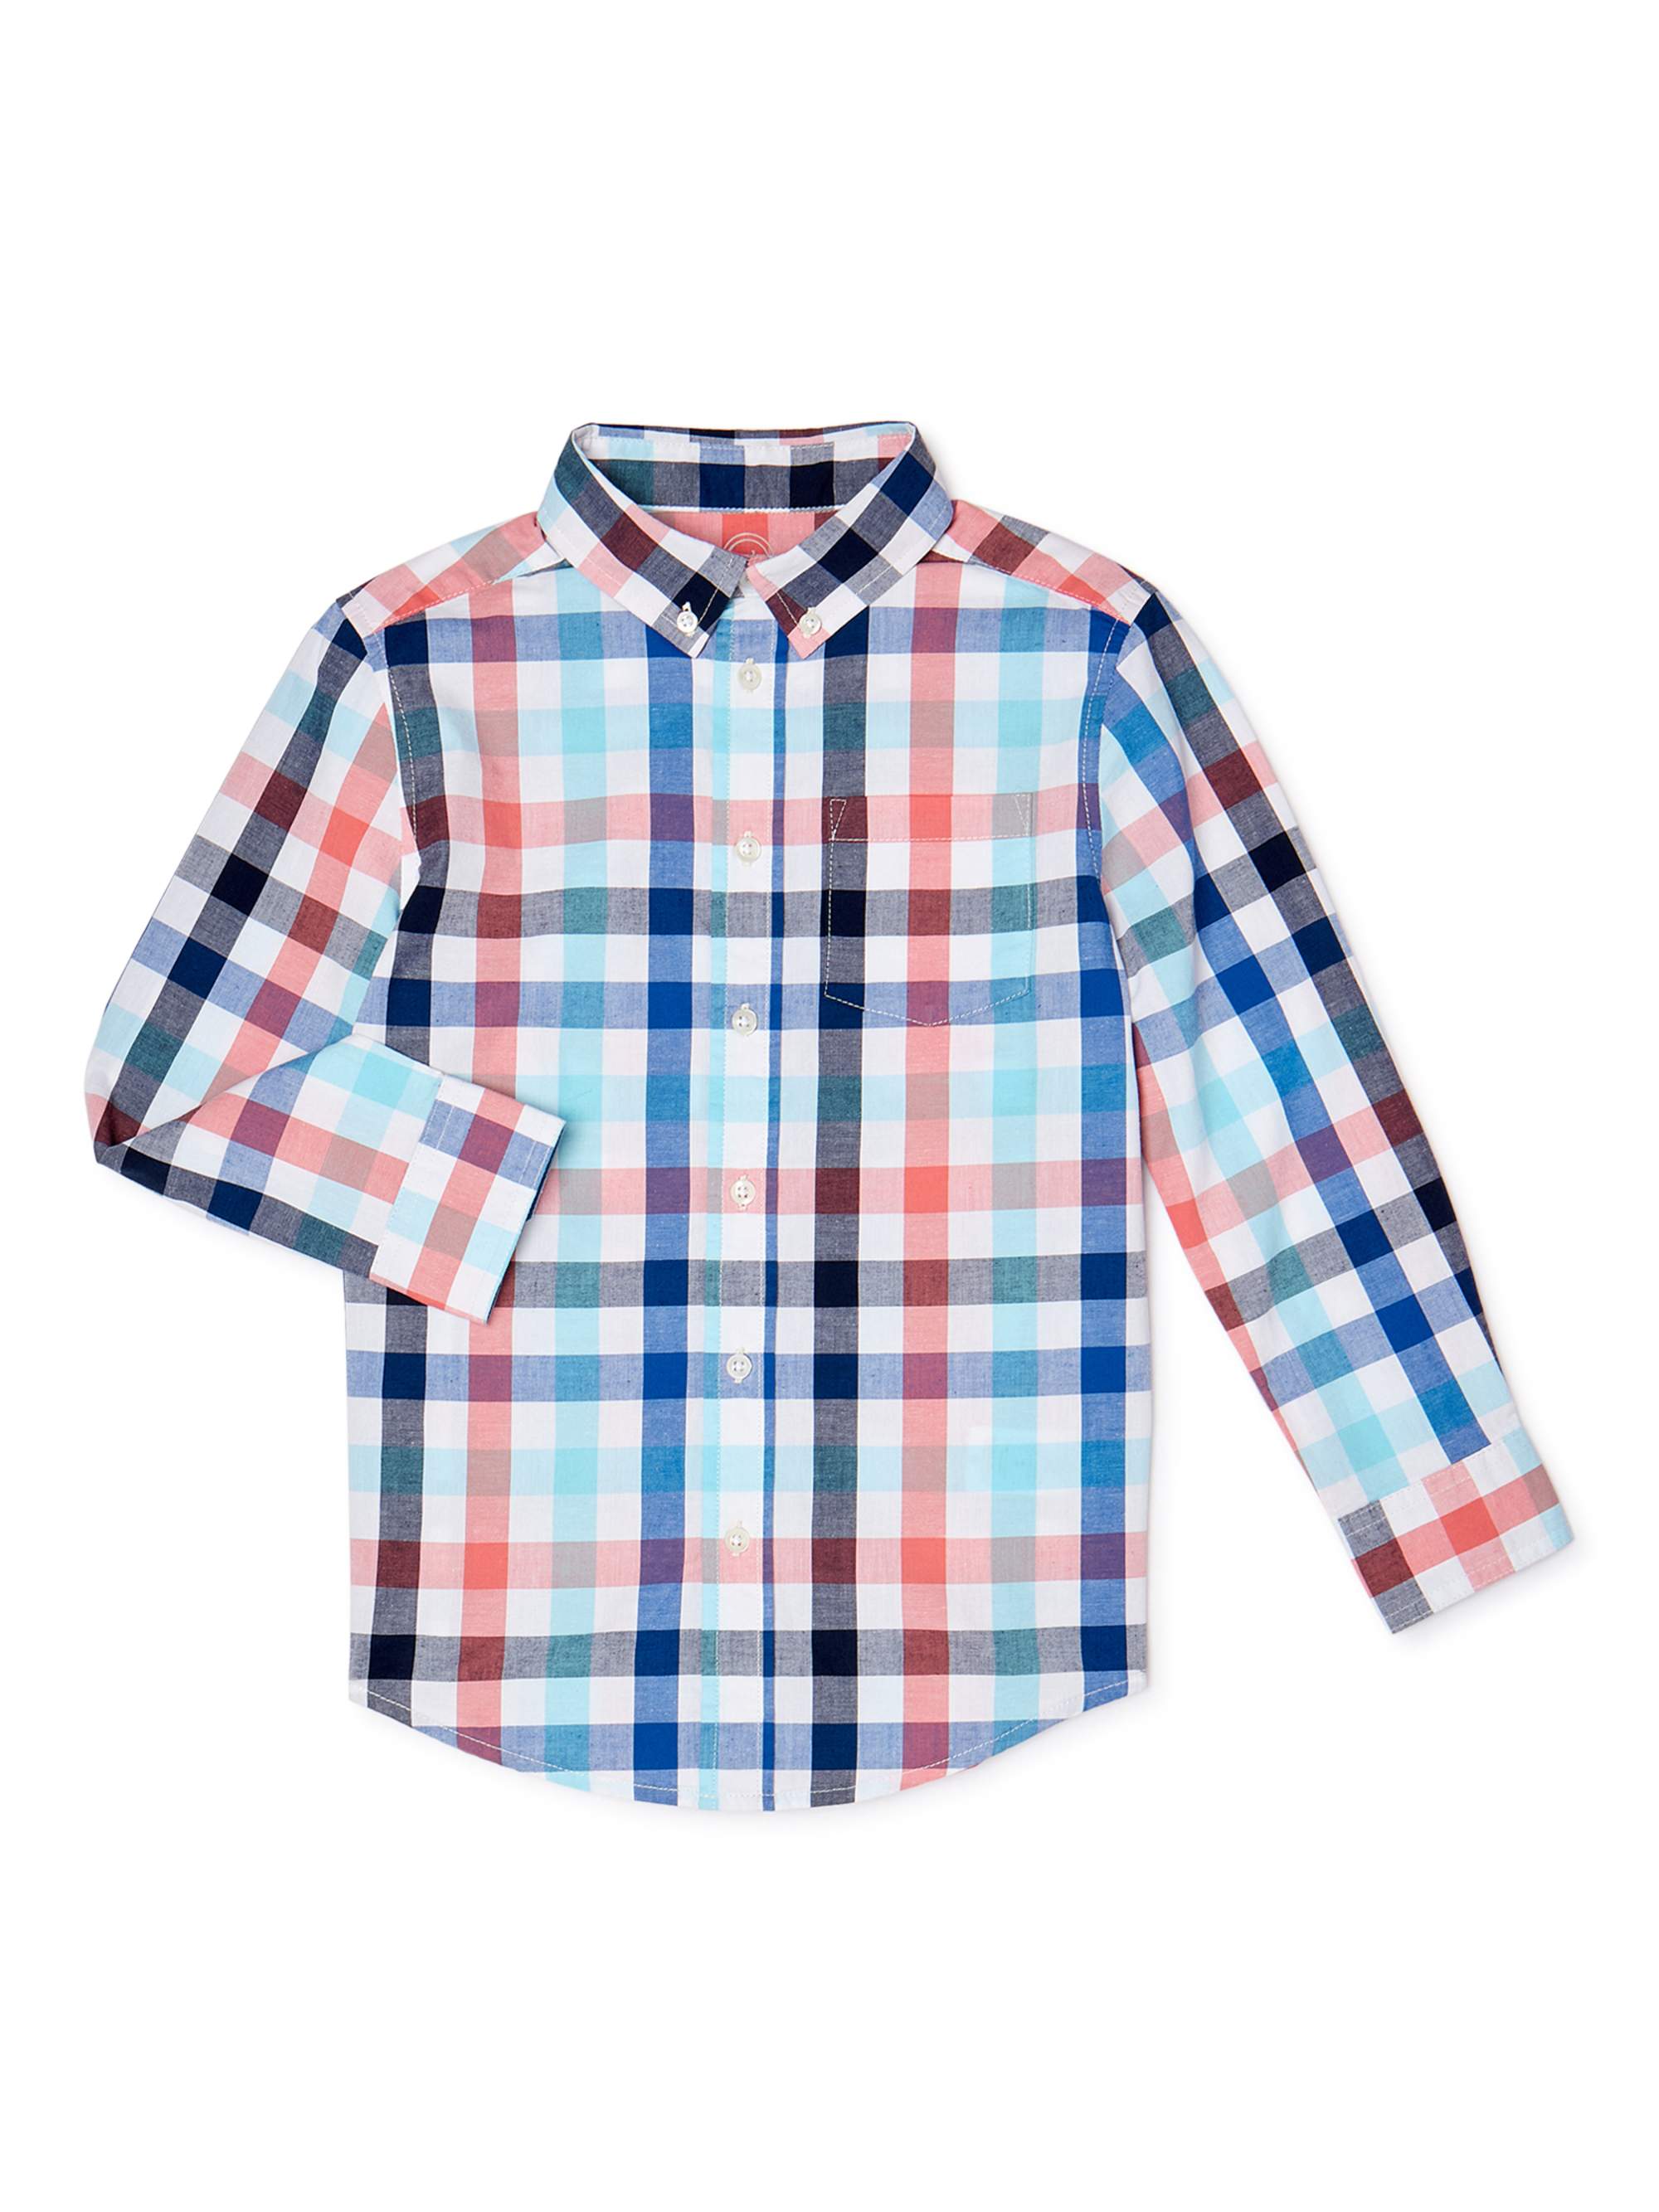 Boys Checked Shirt Long Sleeve Designer Cotton Tops Ages 4-16 Years 